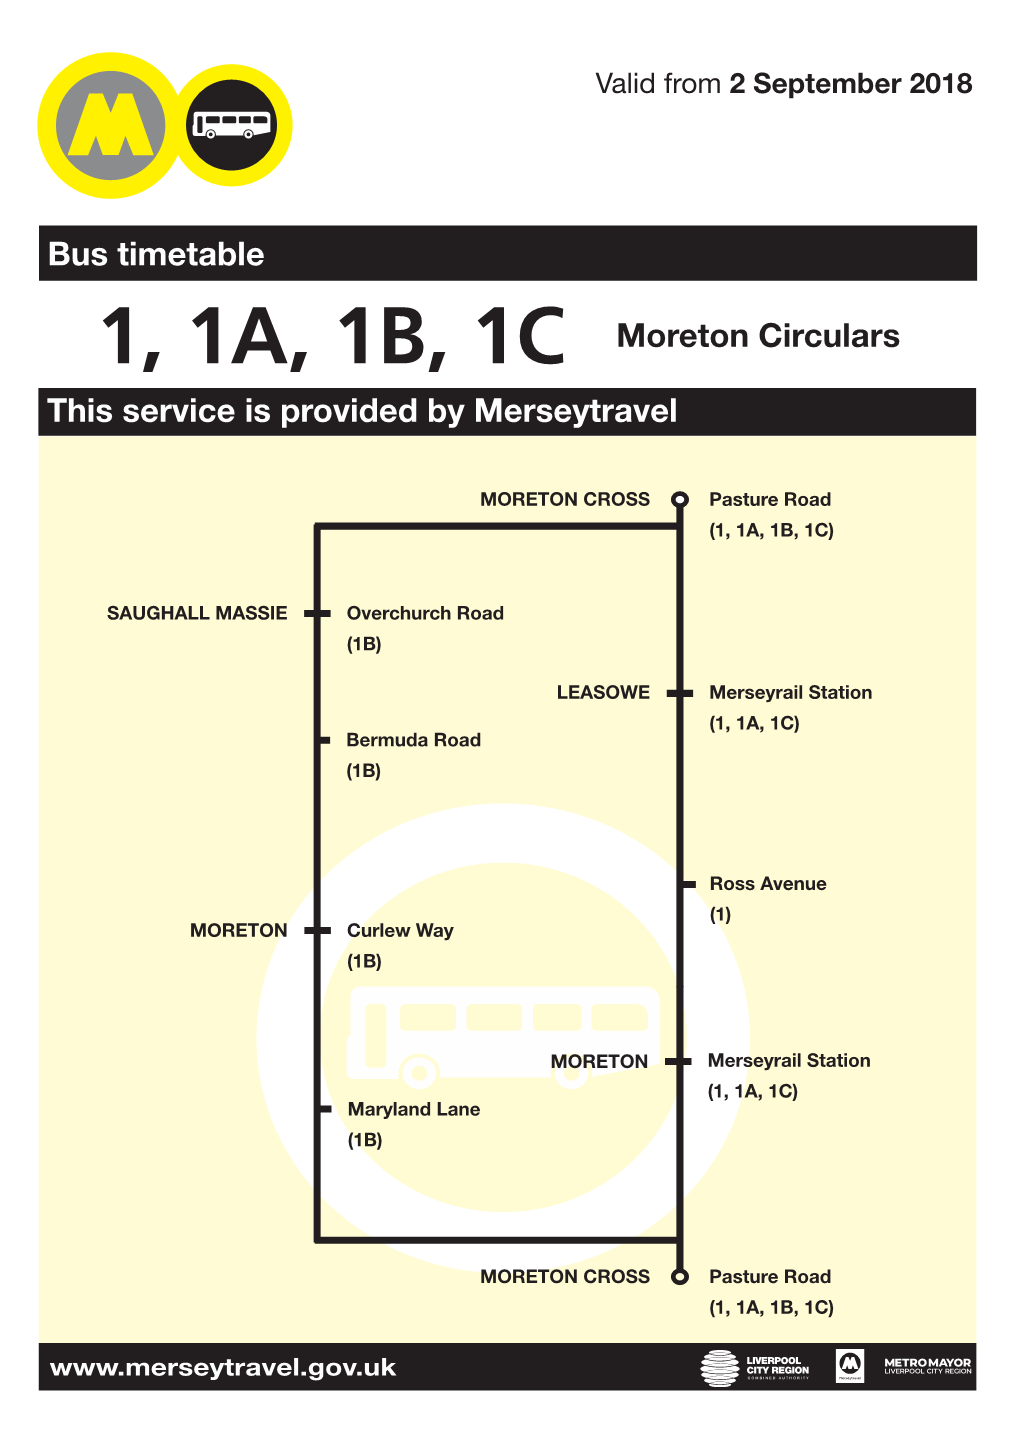 1, 1A, 1B, 1C Moreton Circulars This Service Is Provided by Merseytravel